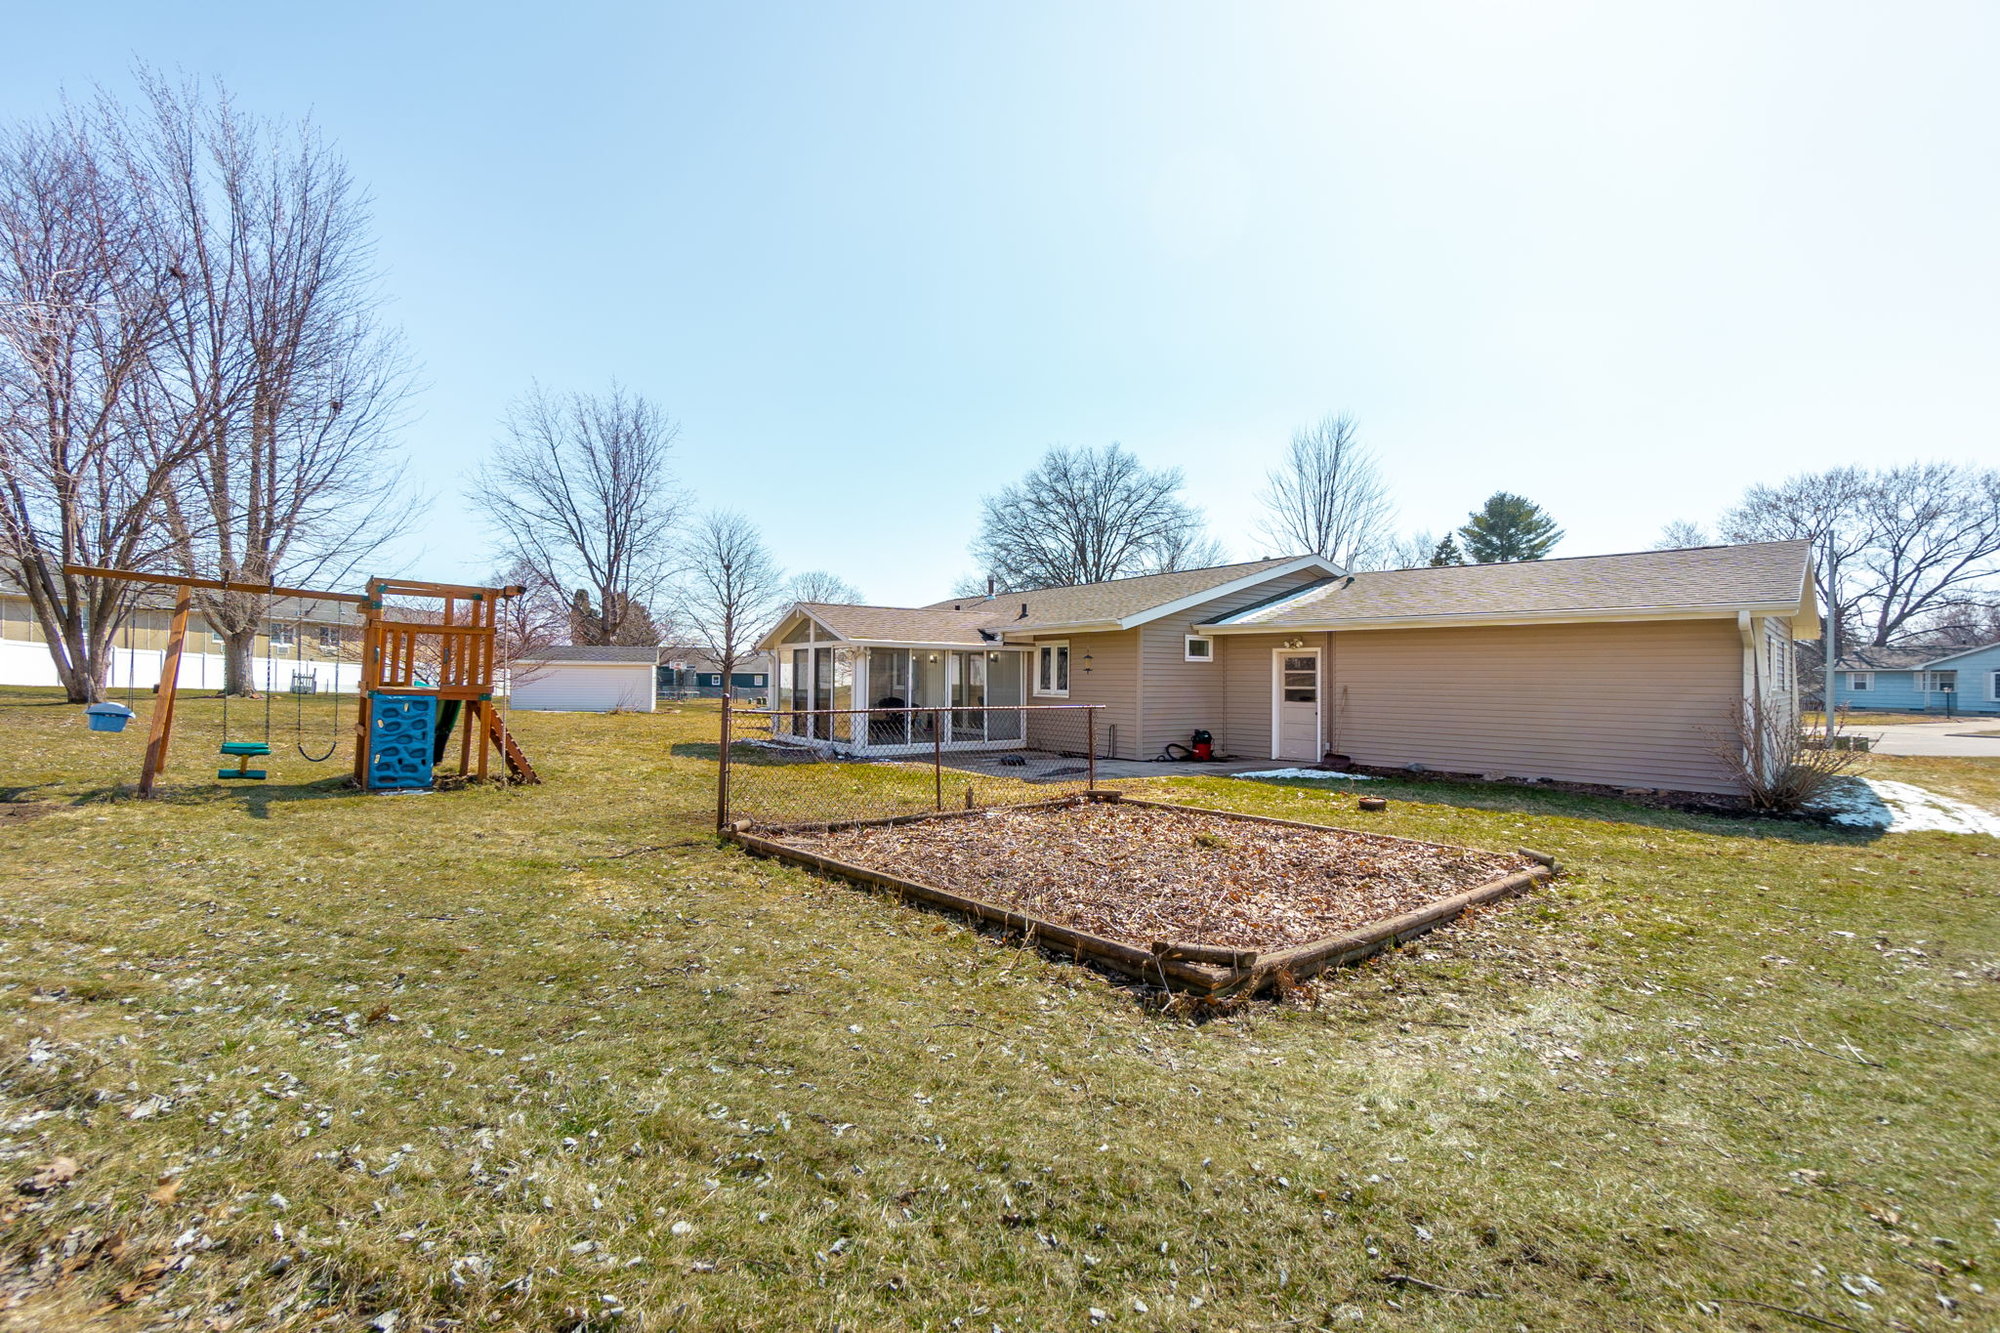 A Breath of Fresh Air. You Need to See this New Listing on Chapman Ct. in Cedar Falls Iowa